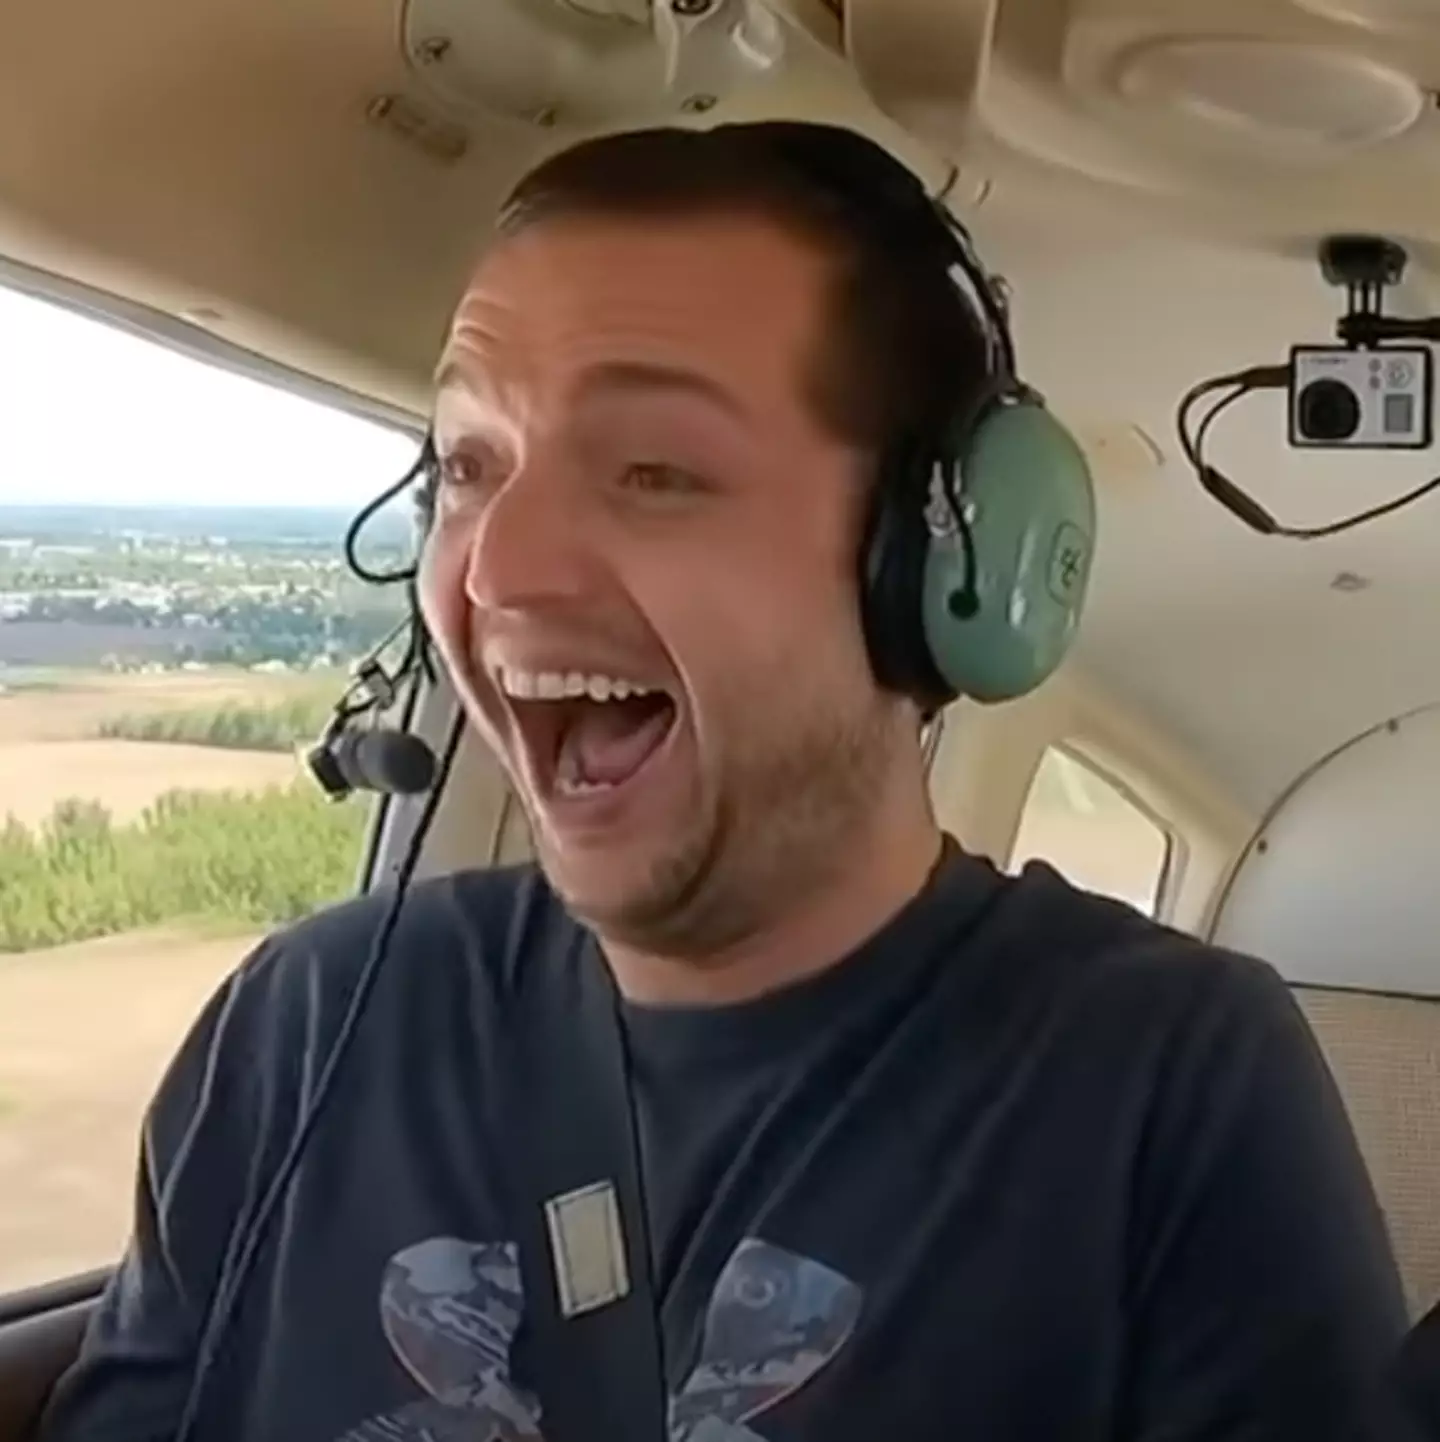 Man pranks his friend into thinking he’s ‘stealing’ a plane without telling him he’s actually a pilot